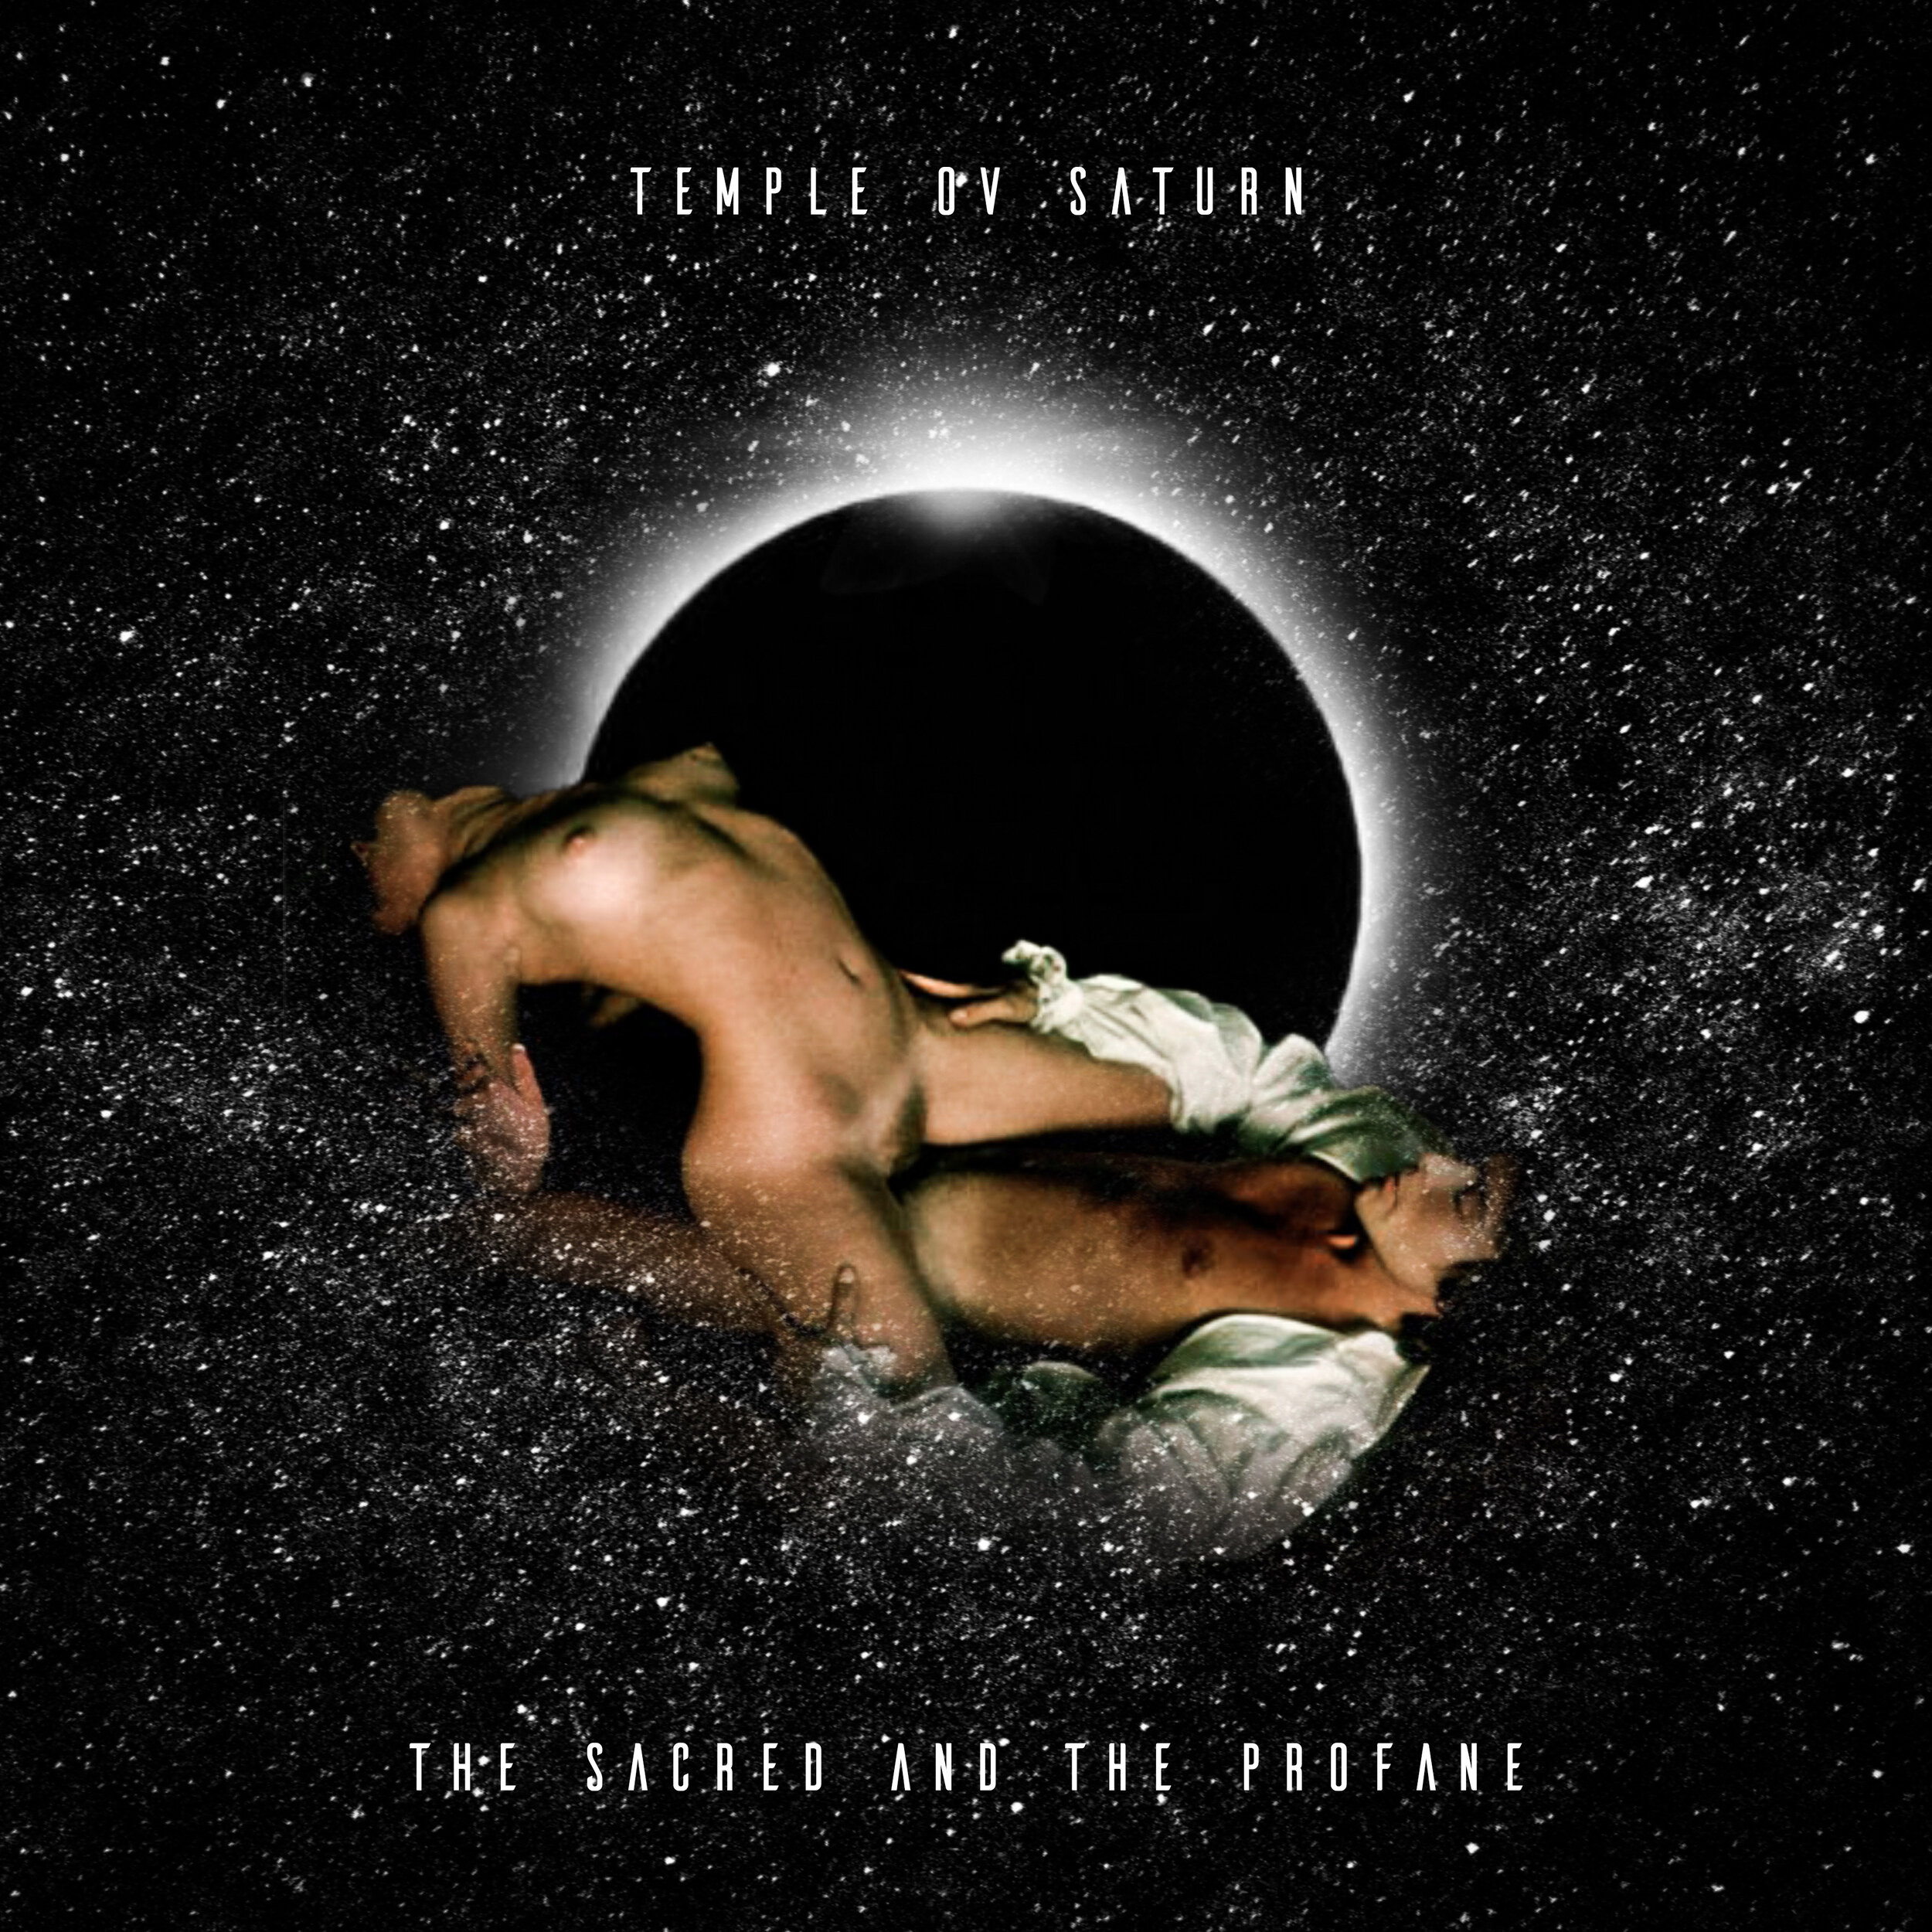 The Sacred and The Profane by Temple ov Saturn